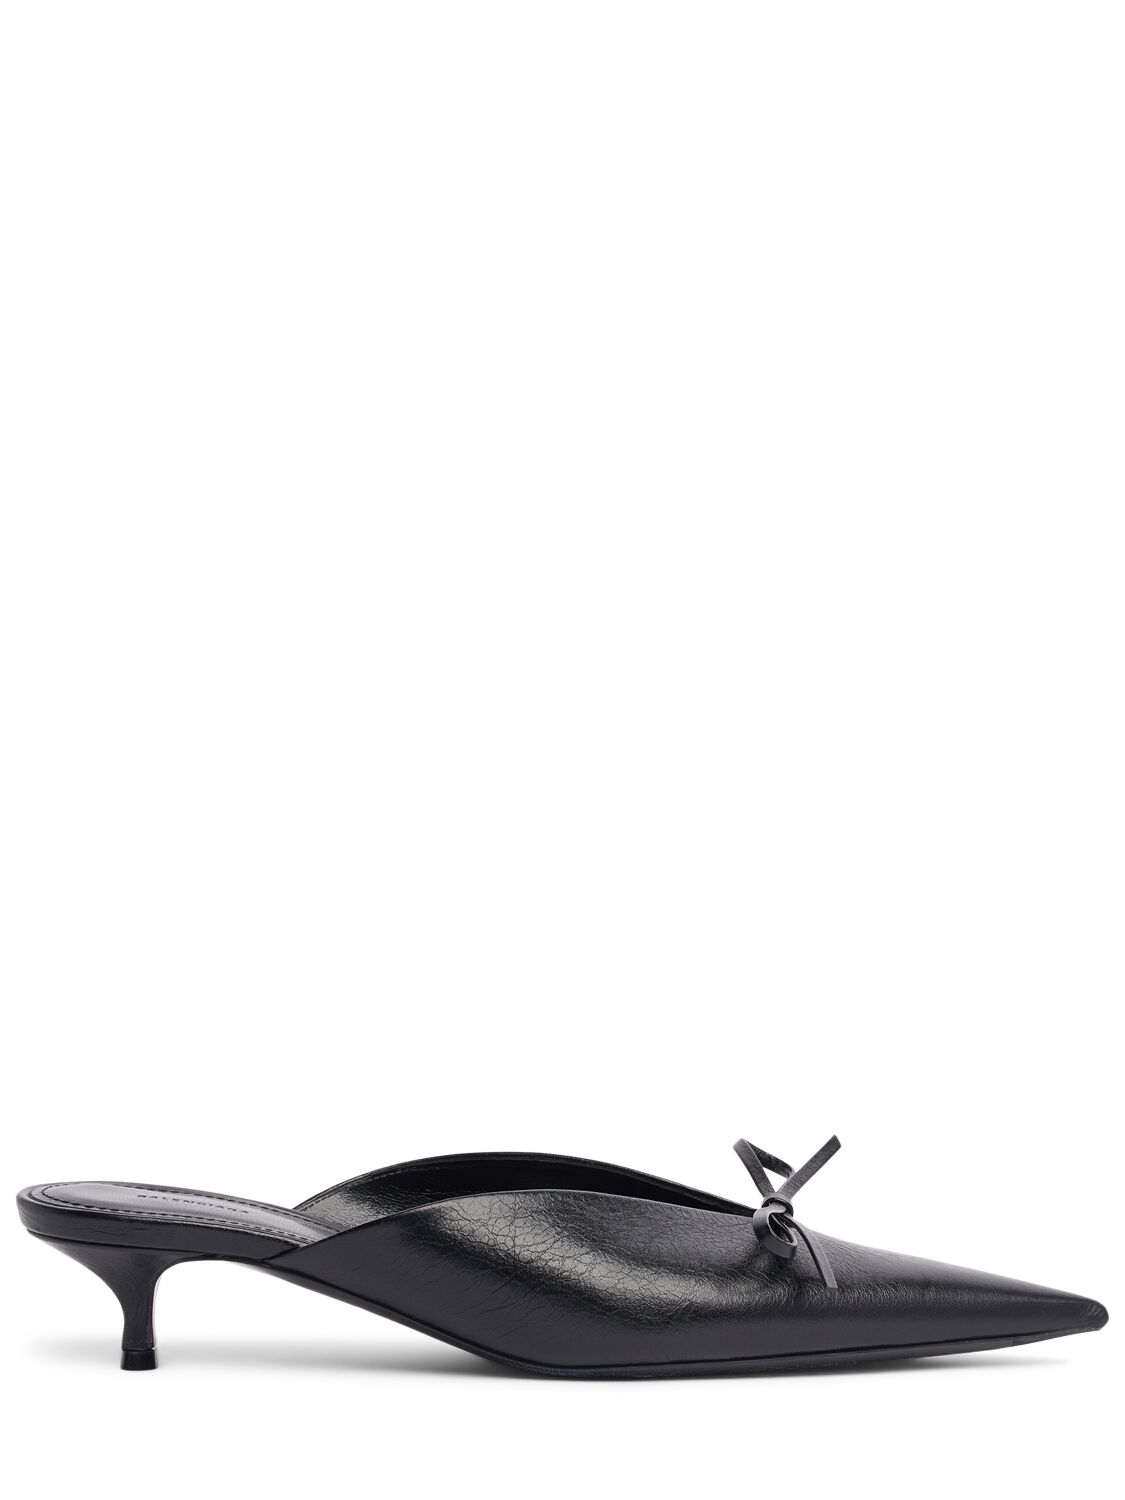 Balenciaga 40mm Knife Bow Leather Mules In Black